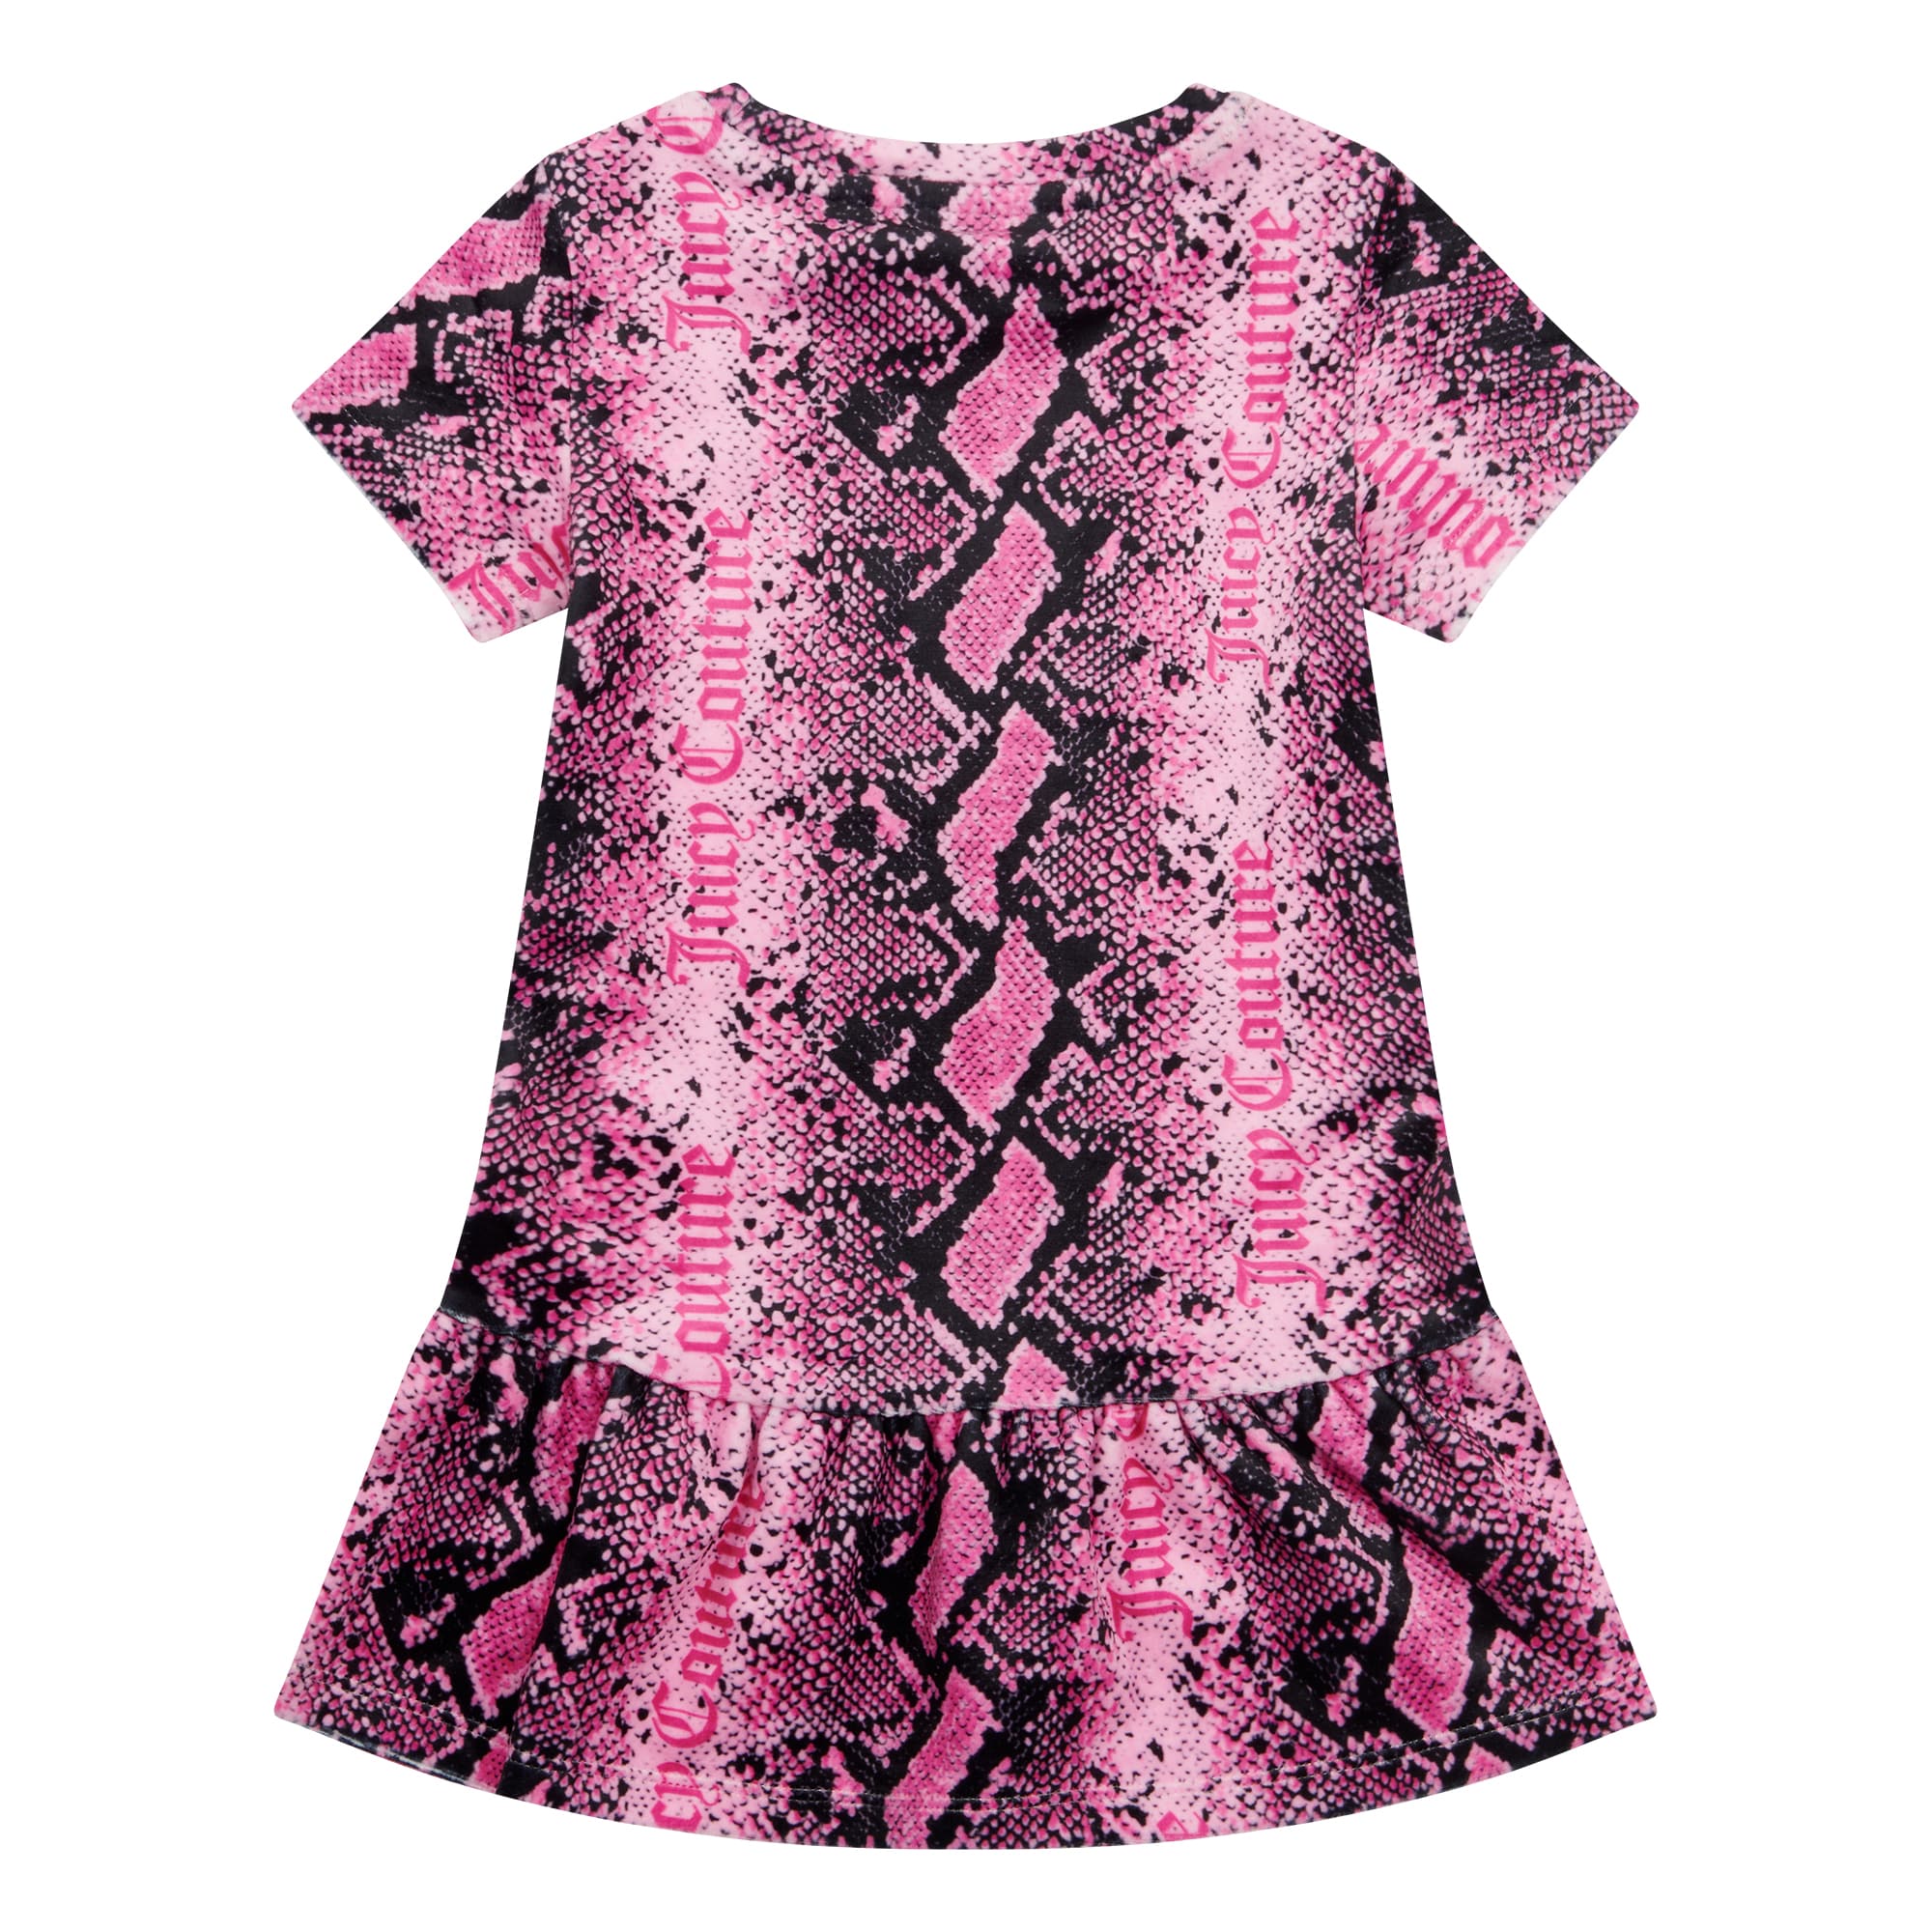 Juicy Couture snakeskin pink girls dress